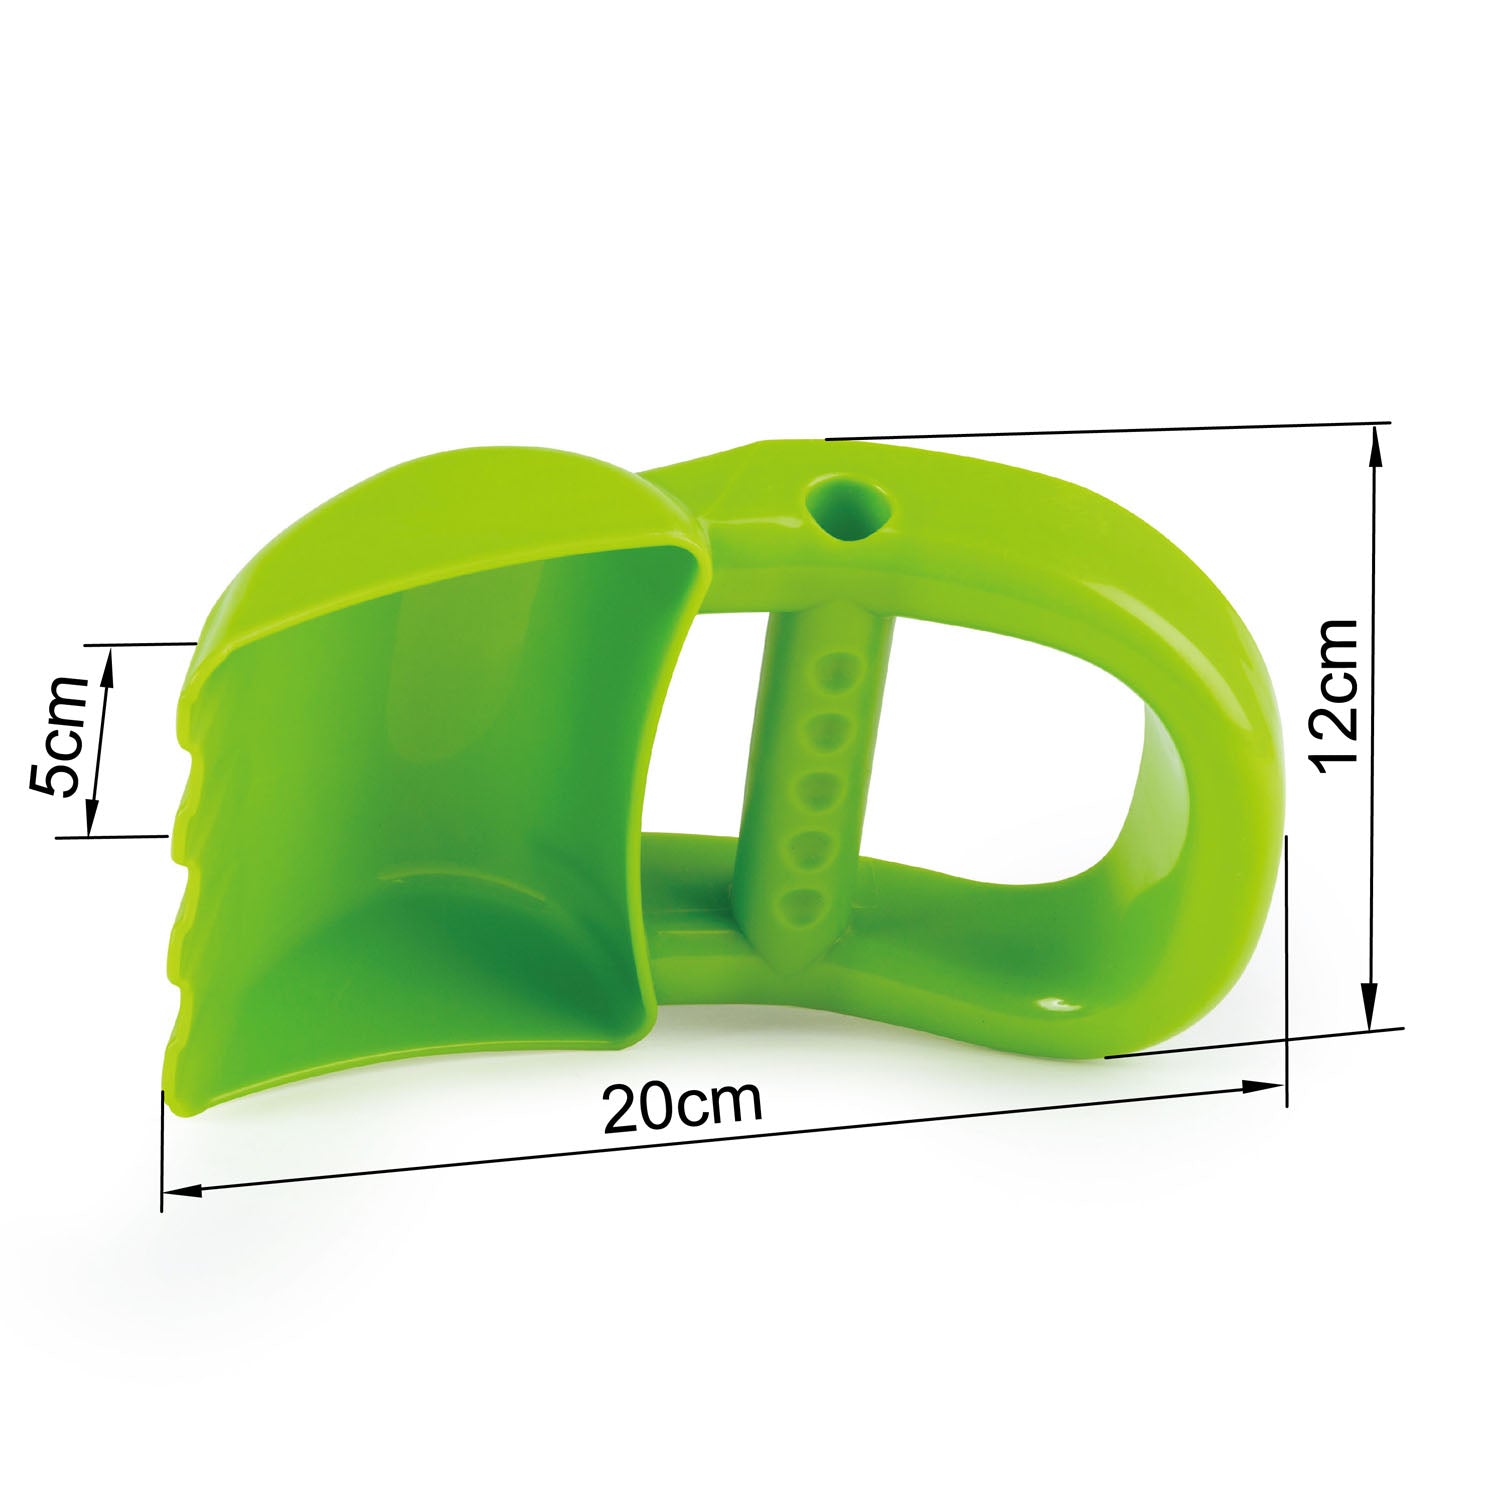 Hape Hand Digger - Green perfect for the sand or backyard play with quality outdoor toys The Toy Wagon